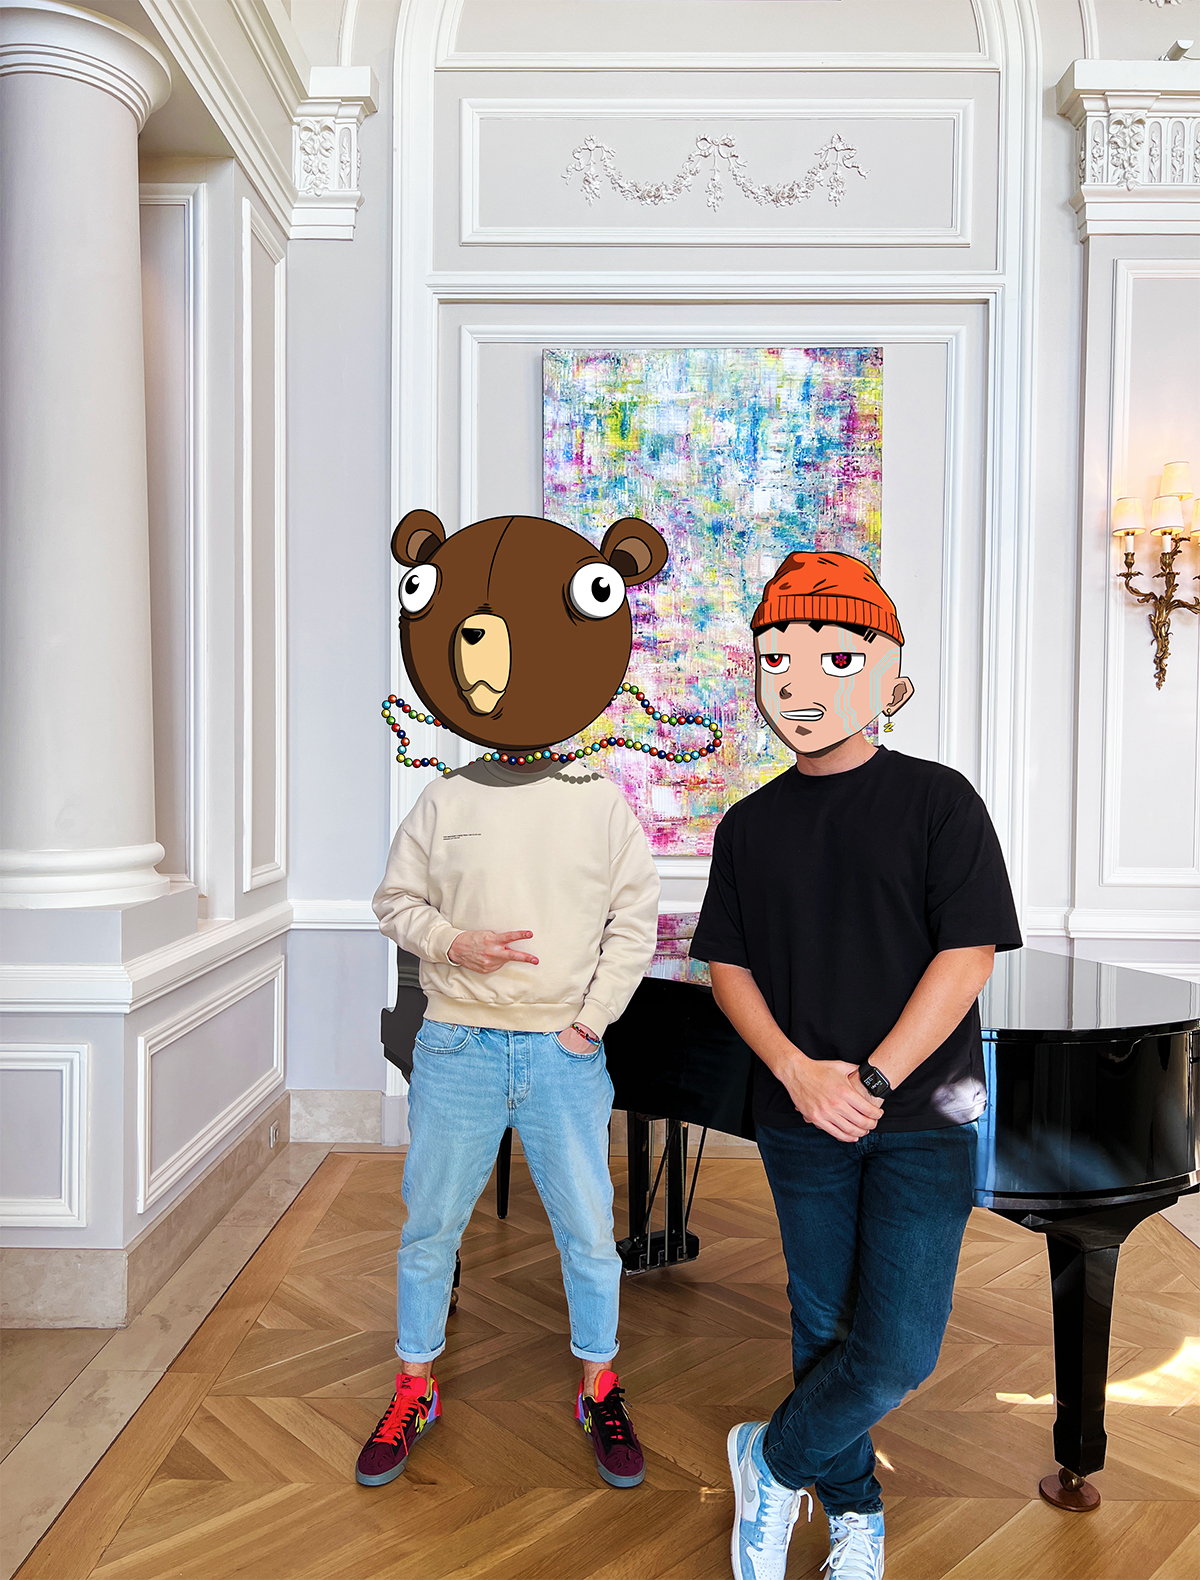 A cartoon head of a man wearing a red hat and a man with a head of a bear leaning on a piano in a room